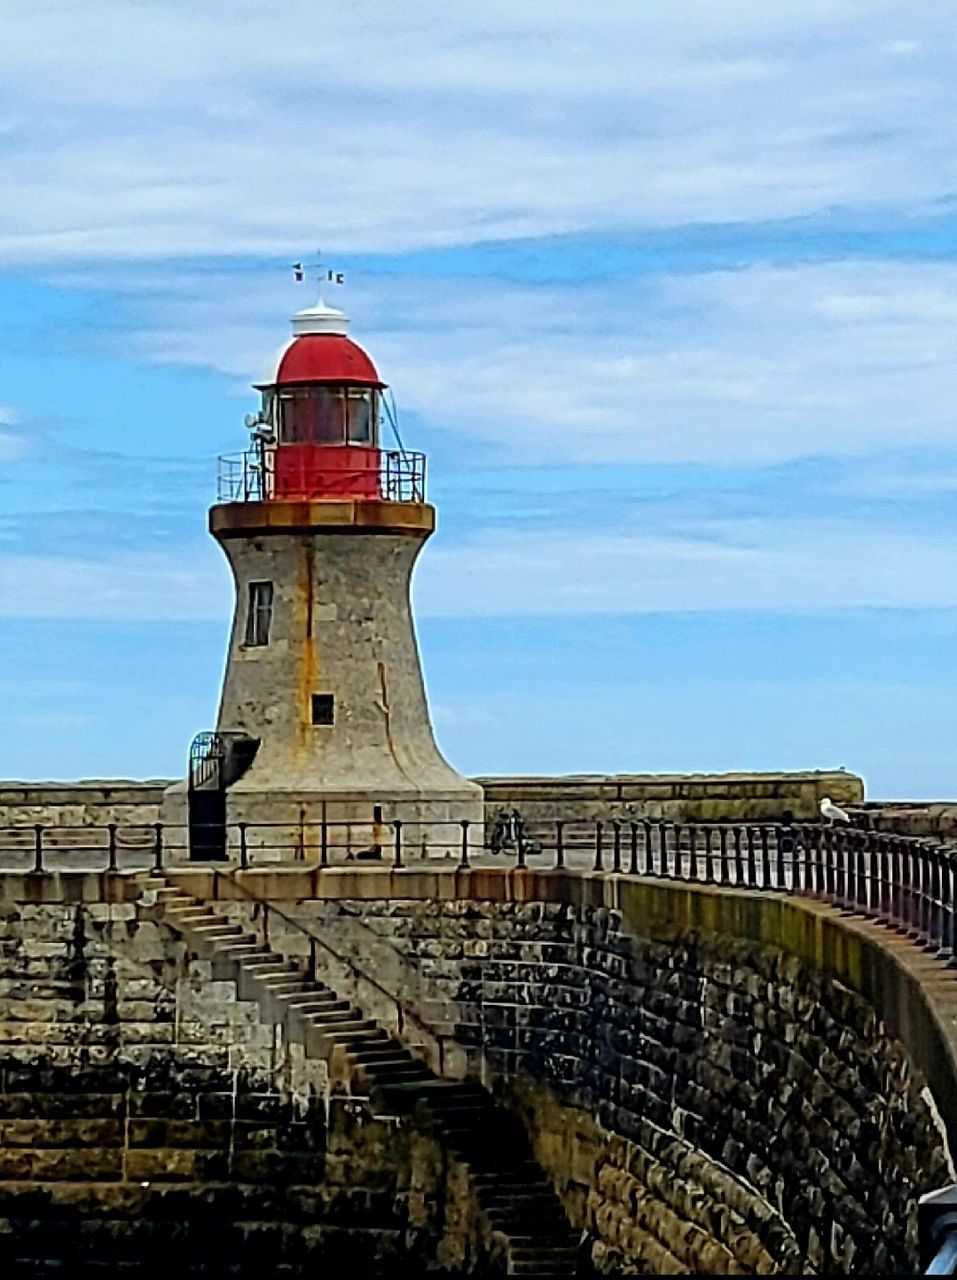 architecture, built structure, lighthouse, tower, building exterior, sky, history, building, security, guidance, protection, the past, landmark, travel destinations, nature, sea, water, travel, no people, cloud, coast, day, outdoors, tourism, city